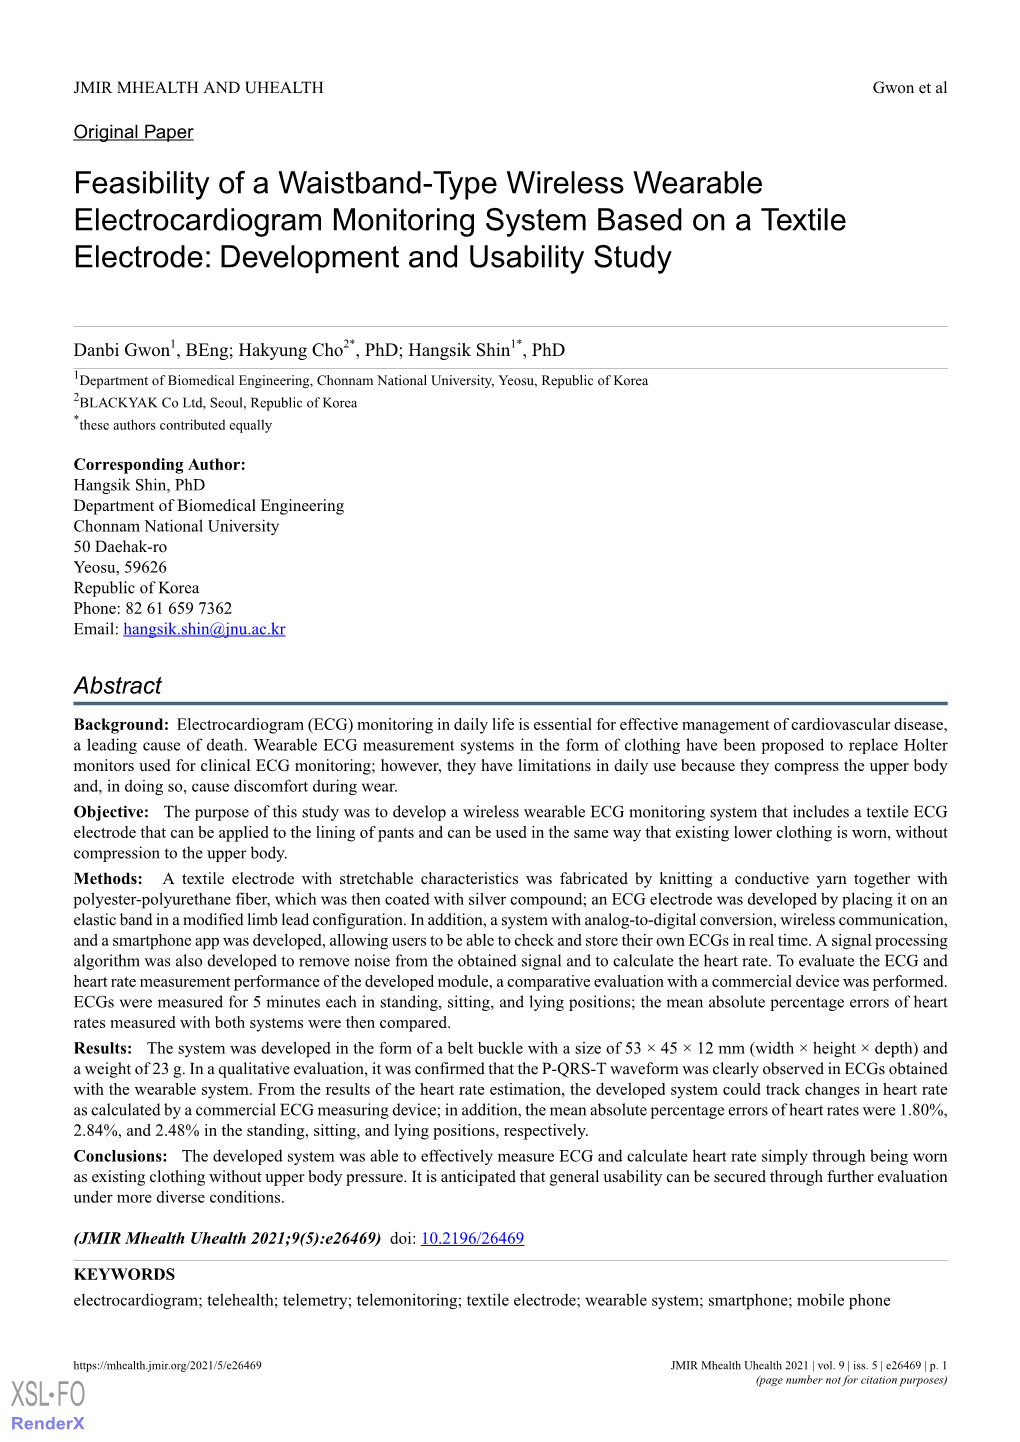 Feasibility of a Waistband-Type Wireless Wearable Electrocardiogram Monitoring System Based on a Textile Electrode: Development and Usability Study